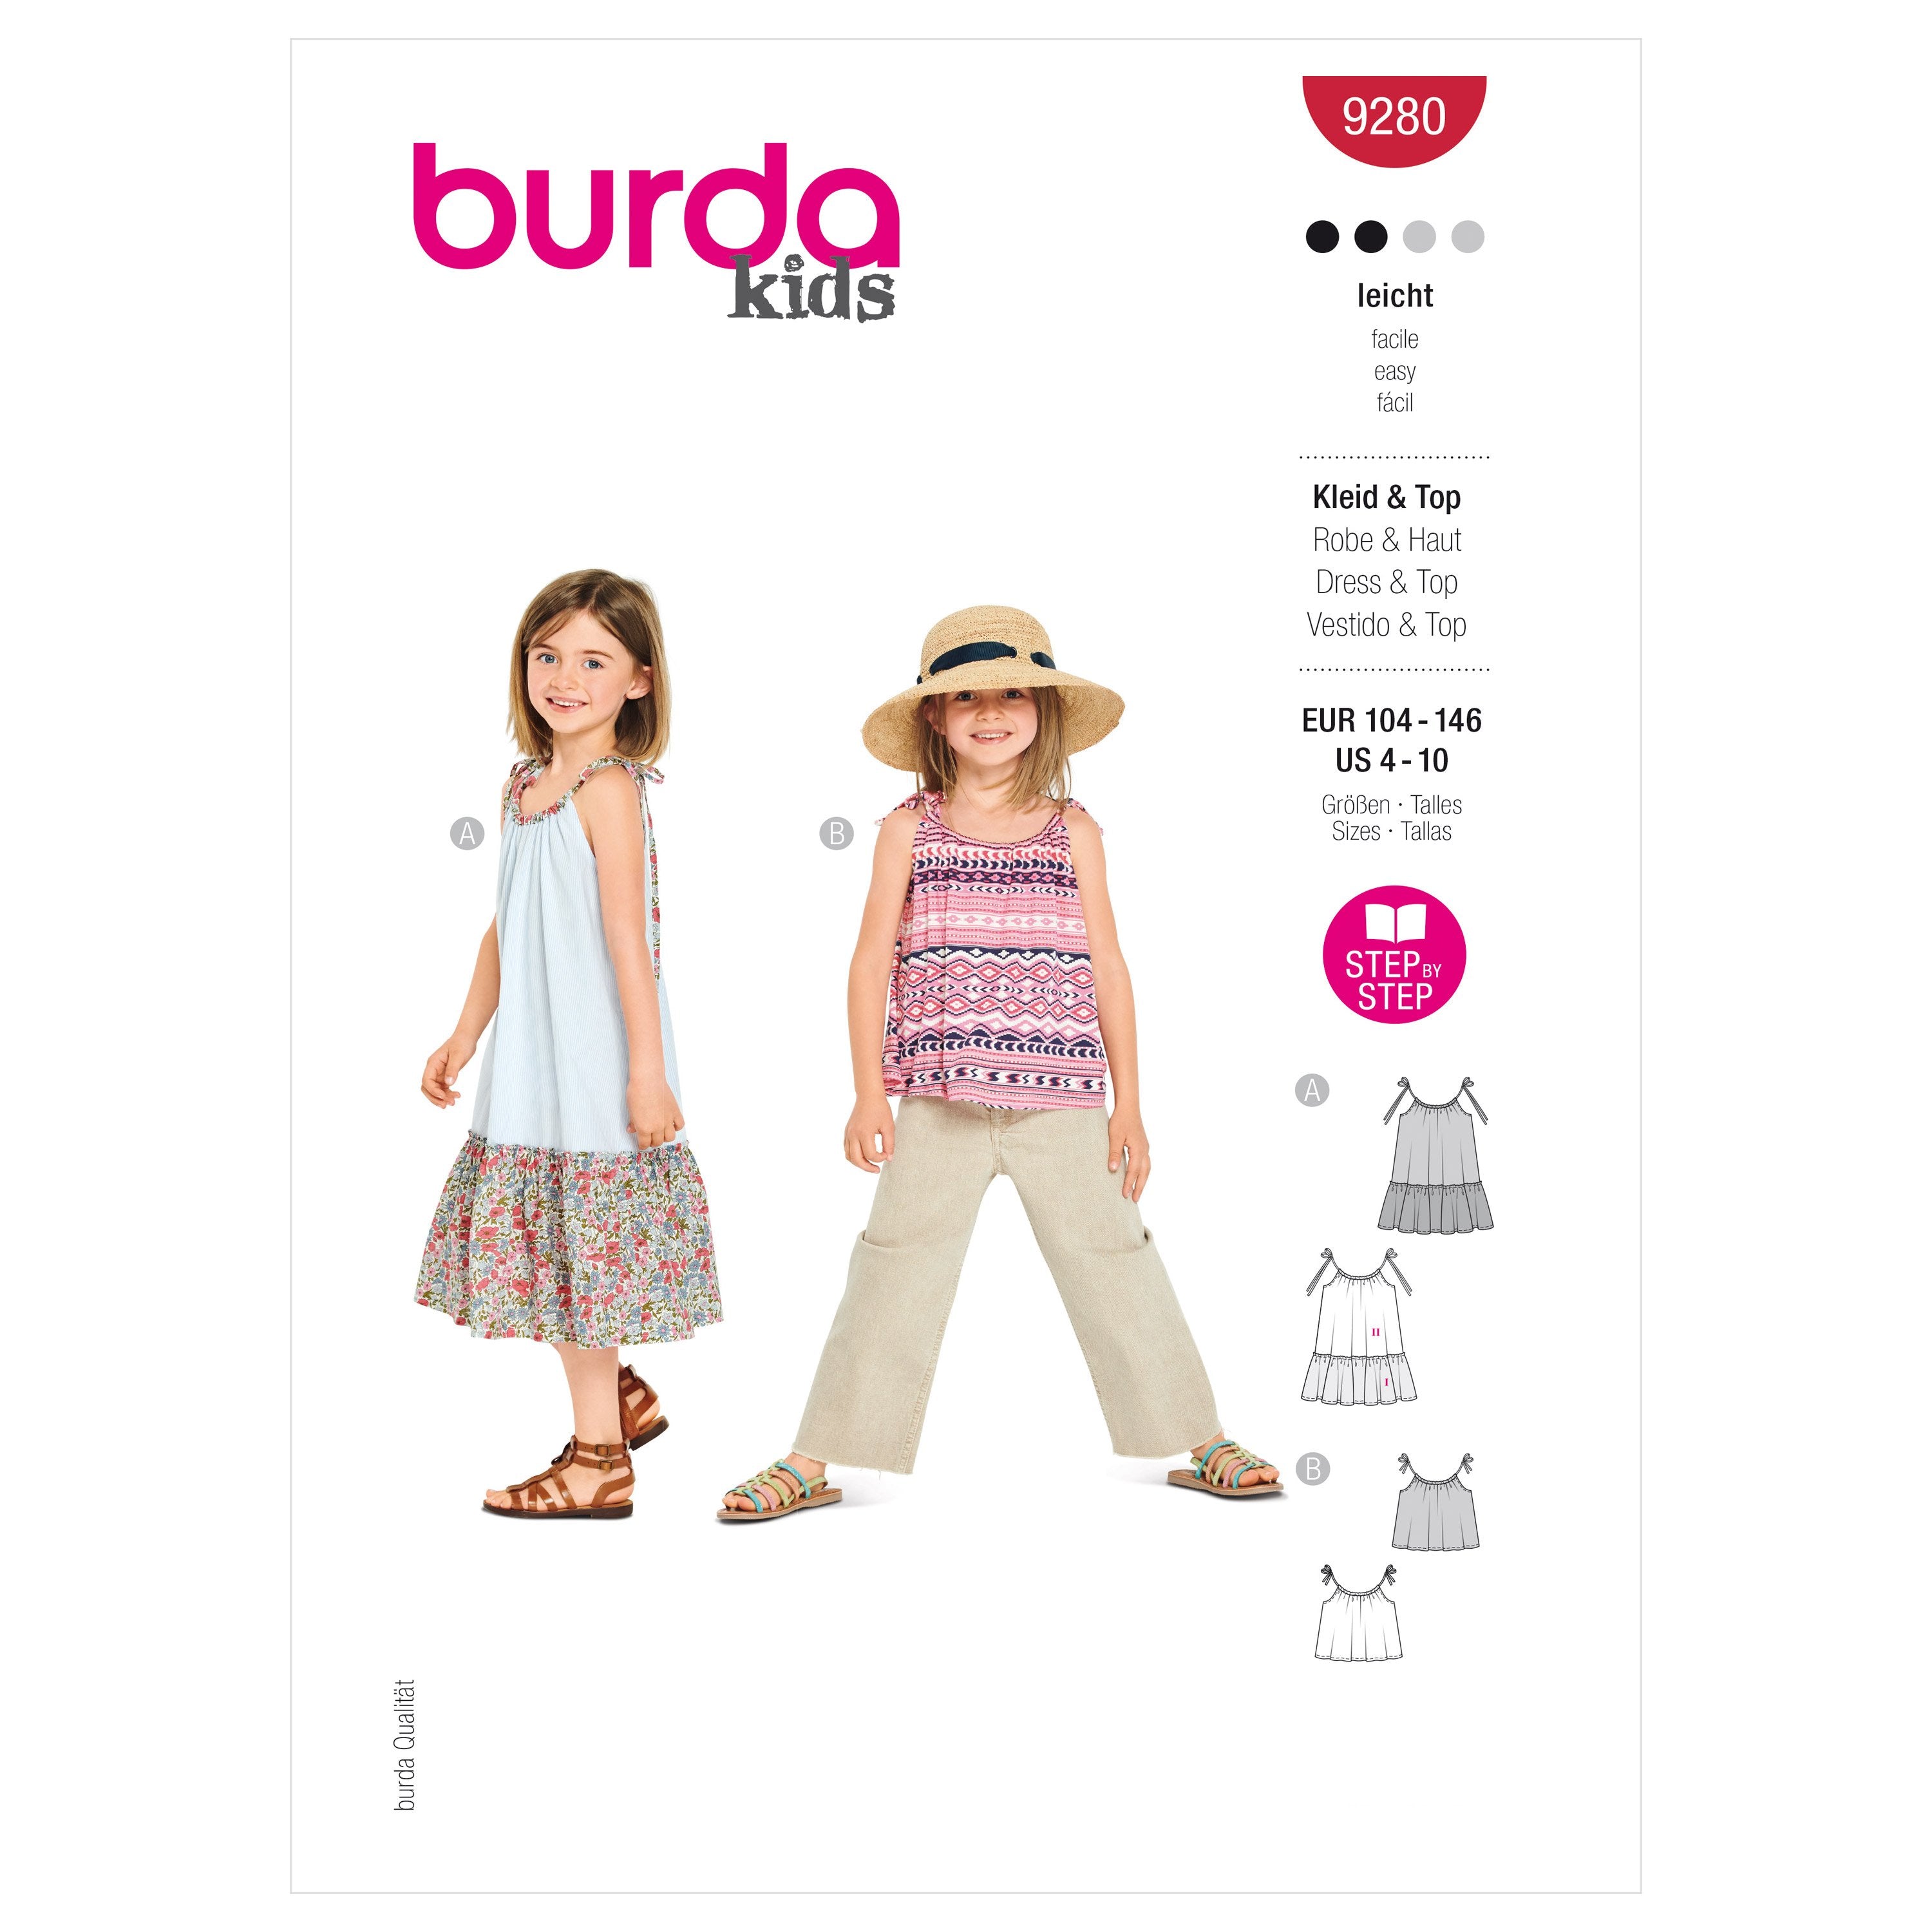 Burda Sewing Pattern 9280 Children's Top and Dress from Jaycotts Sewing Supplies